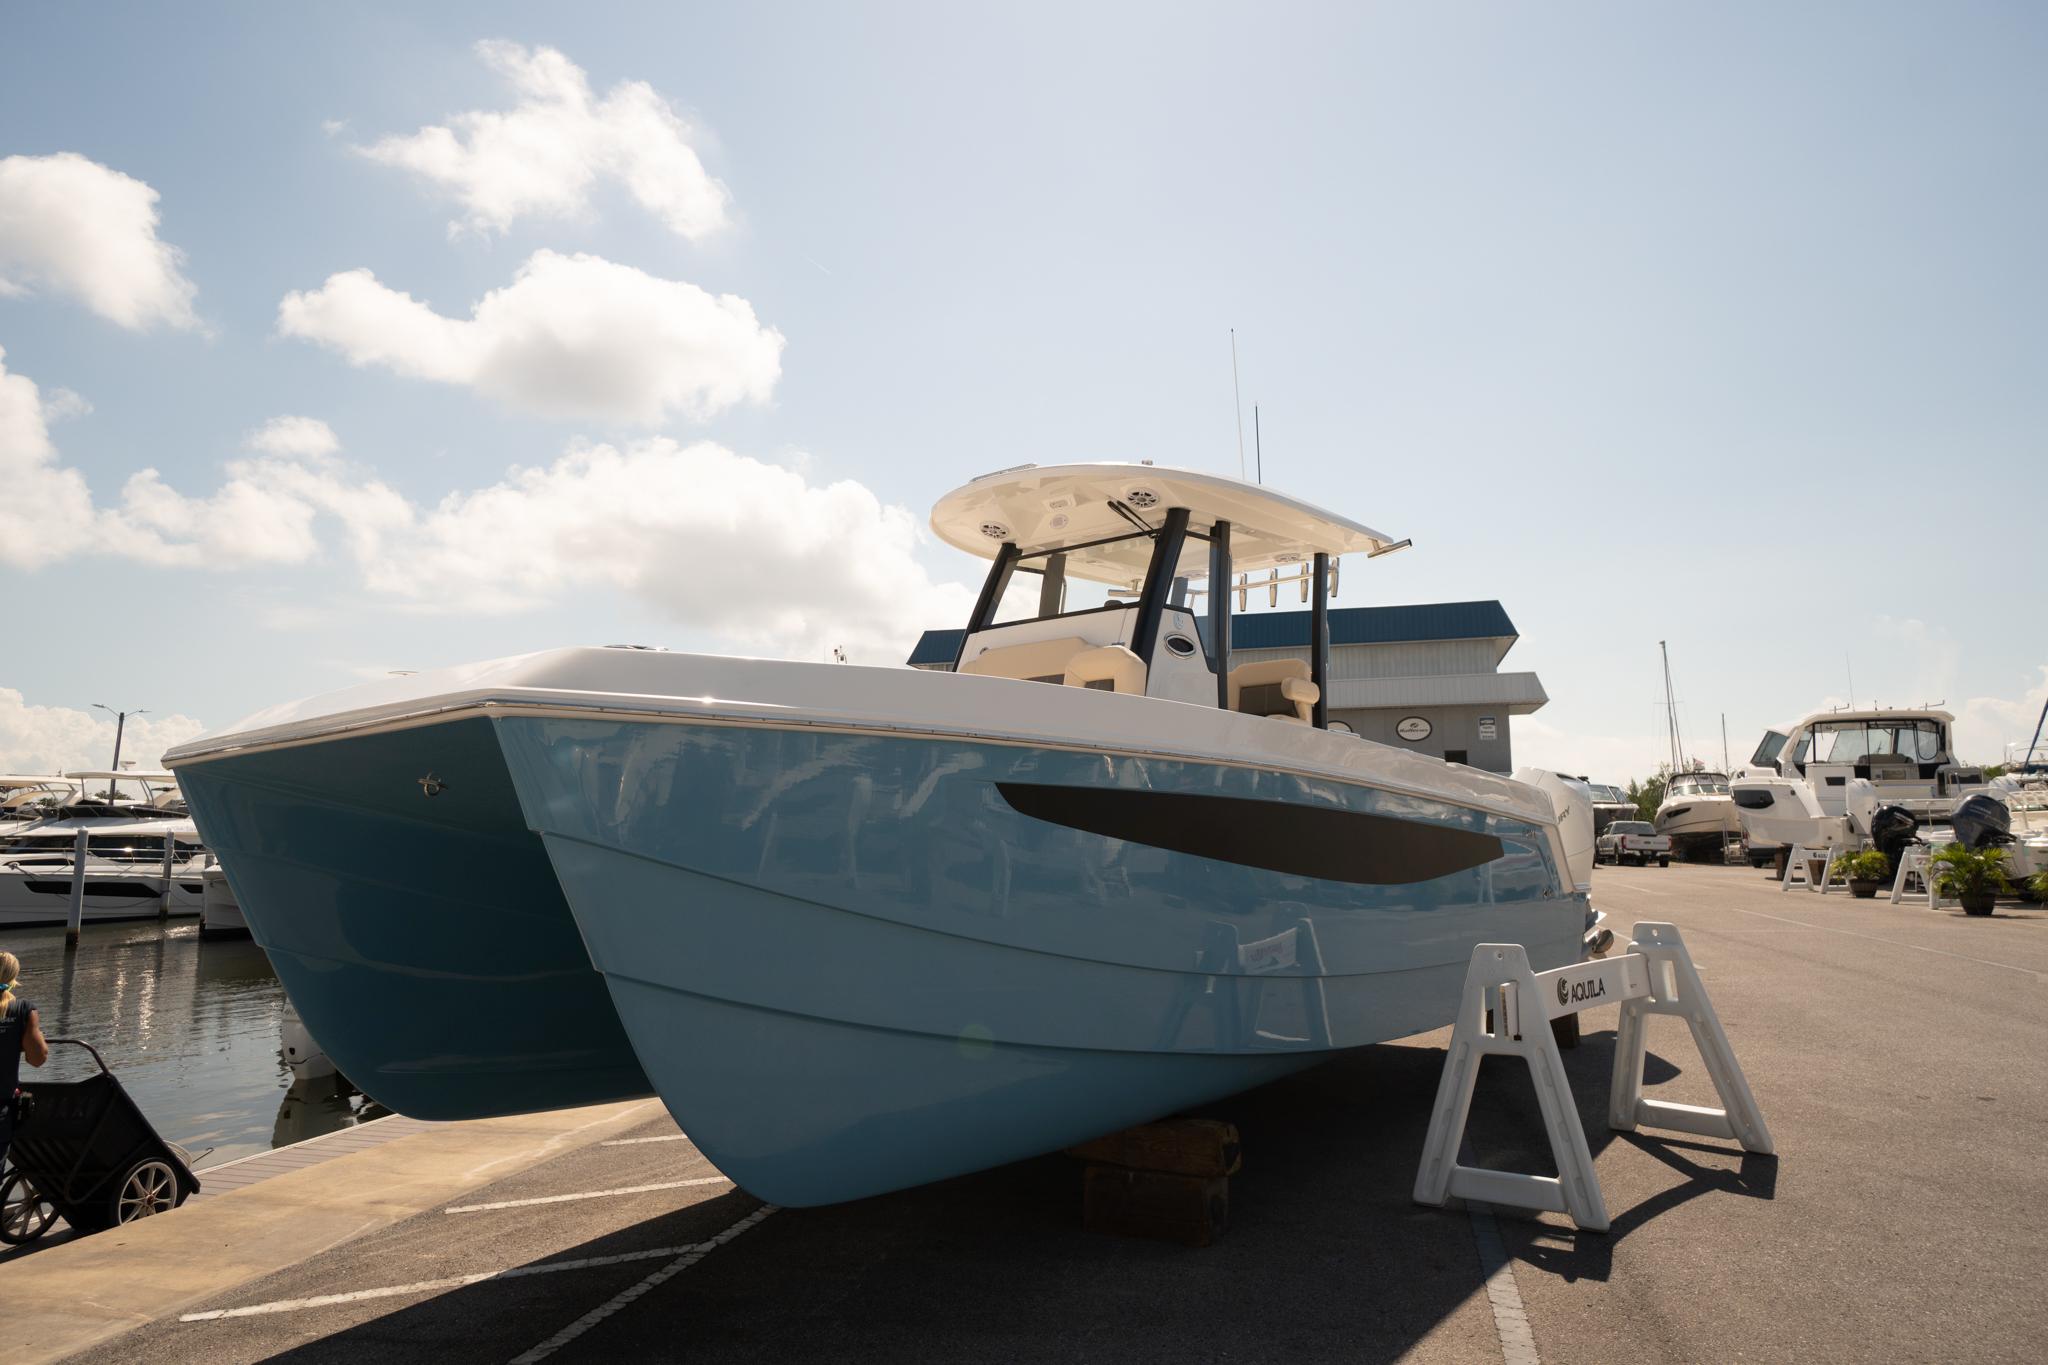 Aquila boats for sale in 32080 - Boat Trader